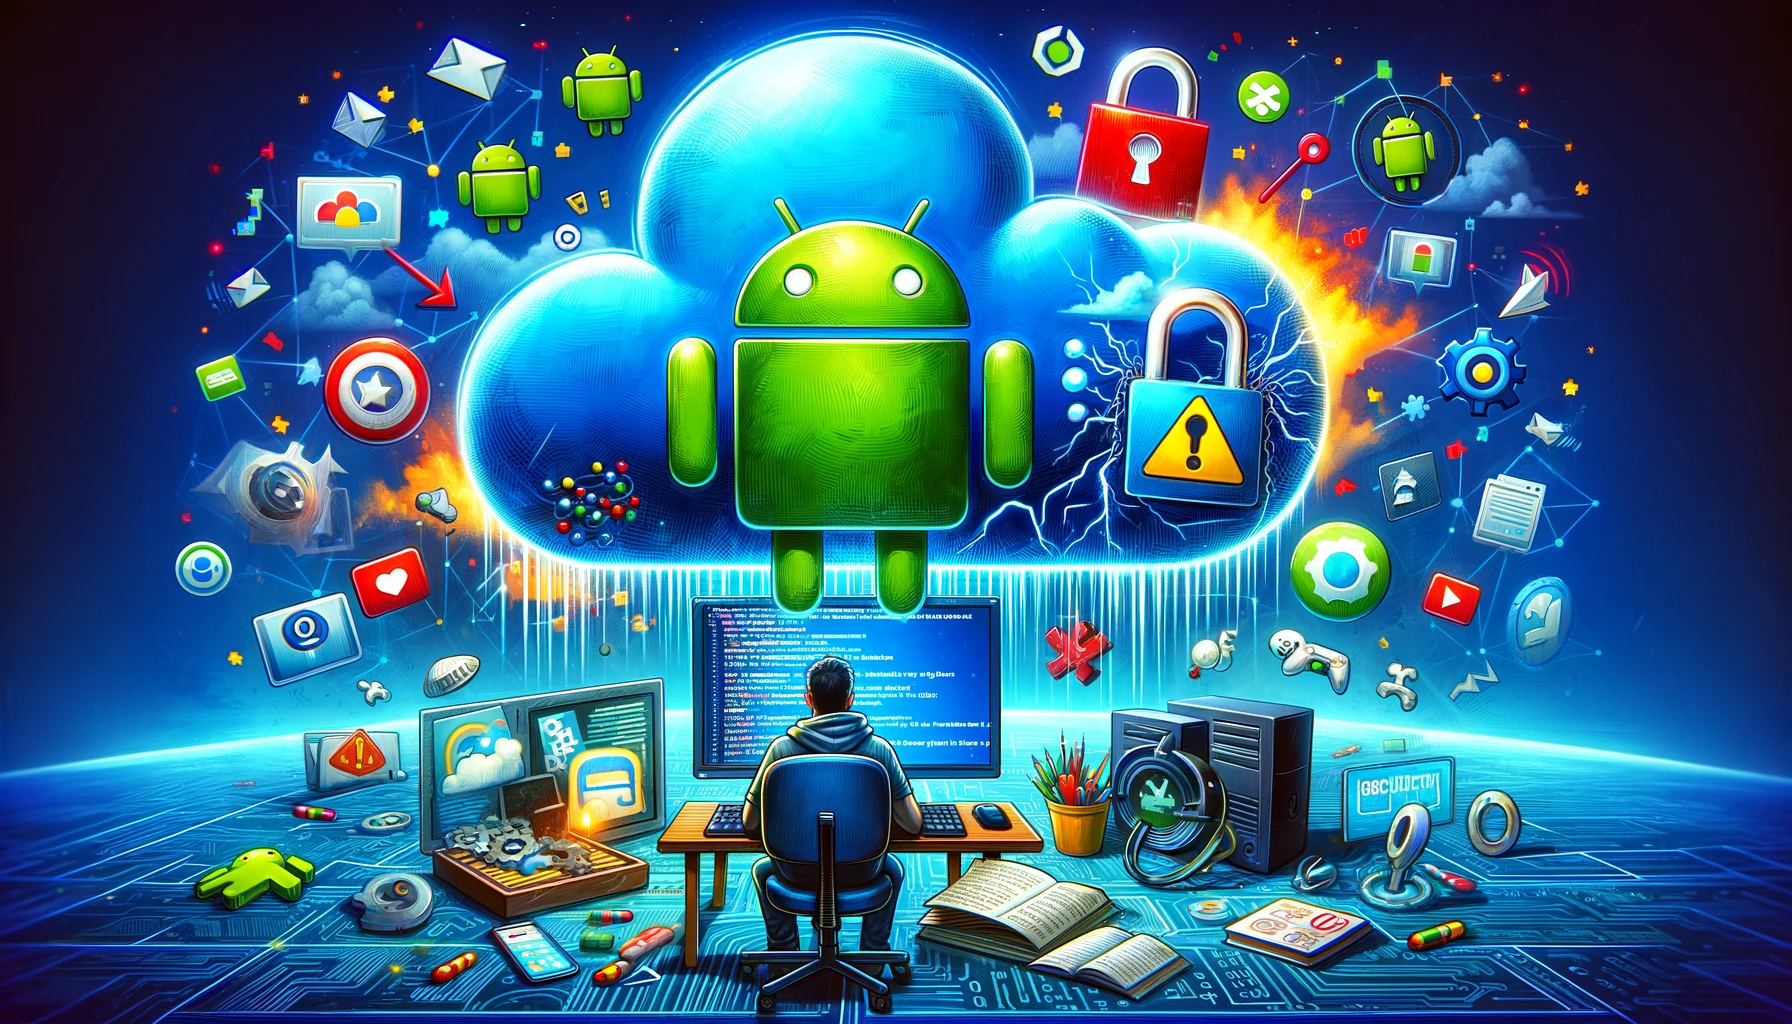 Android game dev’s Google Drive misconfig highlights cloud security risks